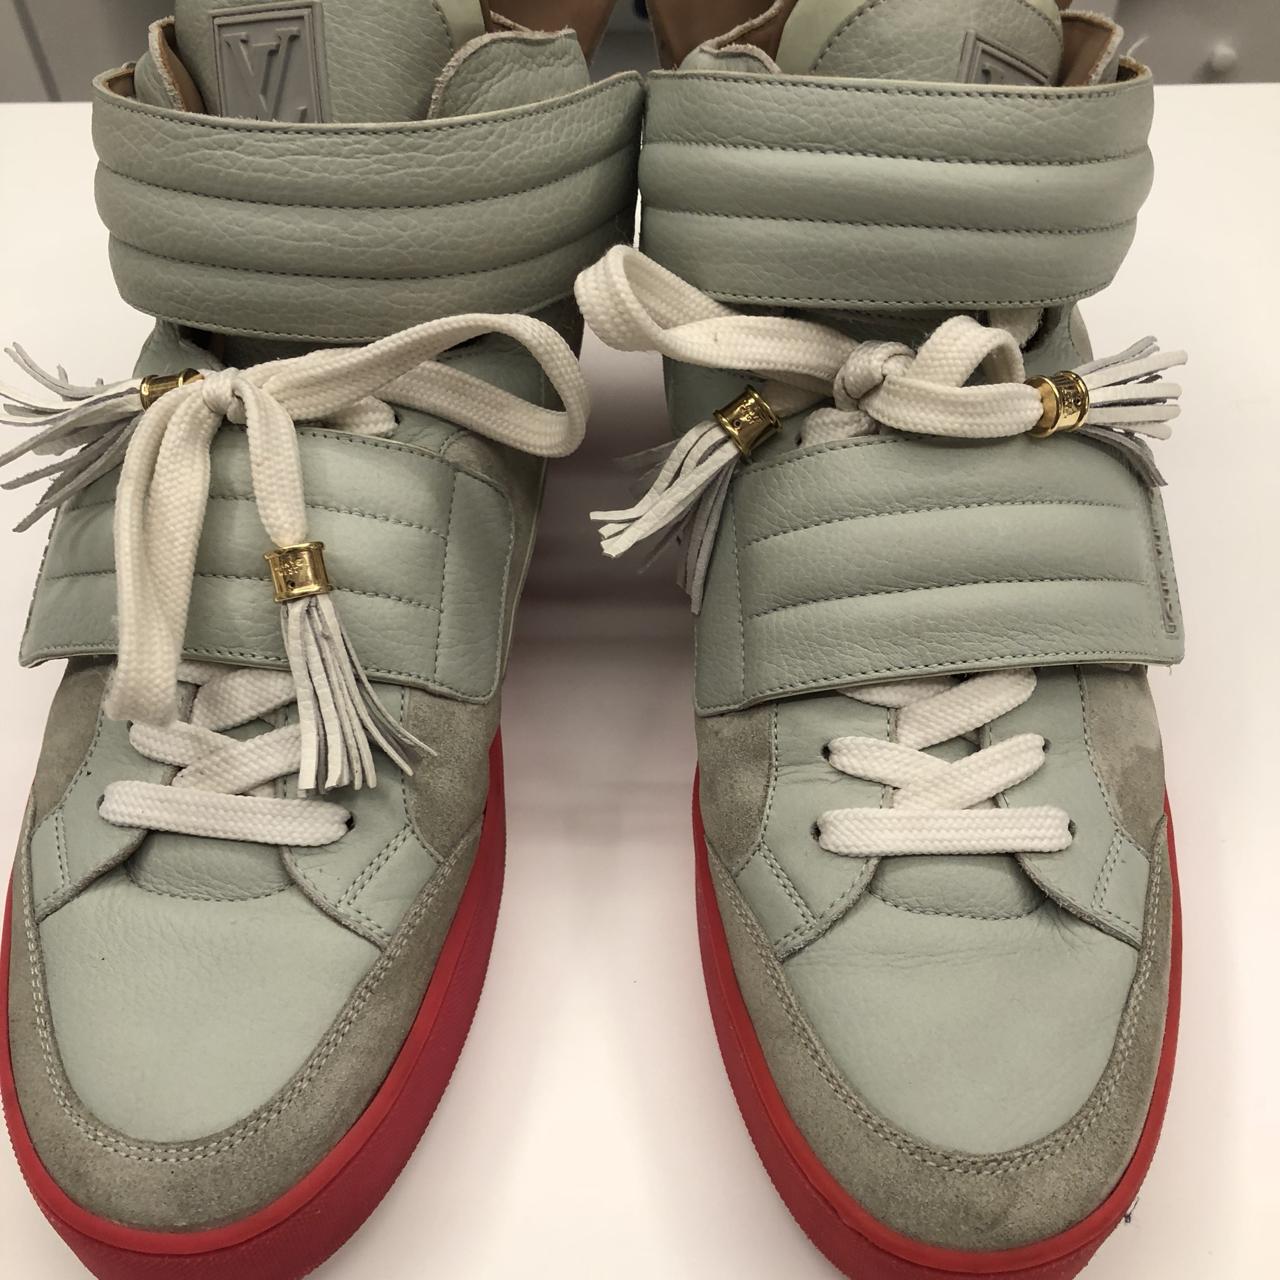 Kanye West x Louis Vuitton Don Red – SoleSeekers